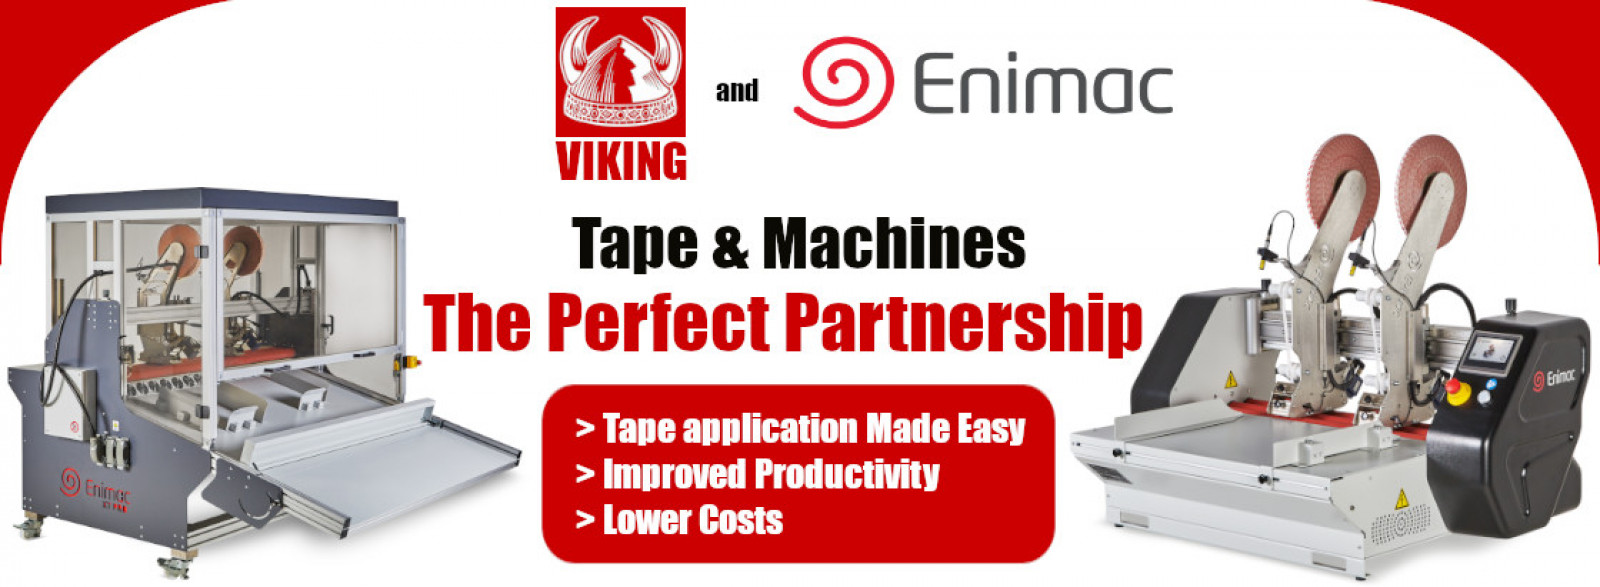 Tape and Machines - The perfect partnership